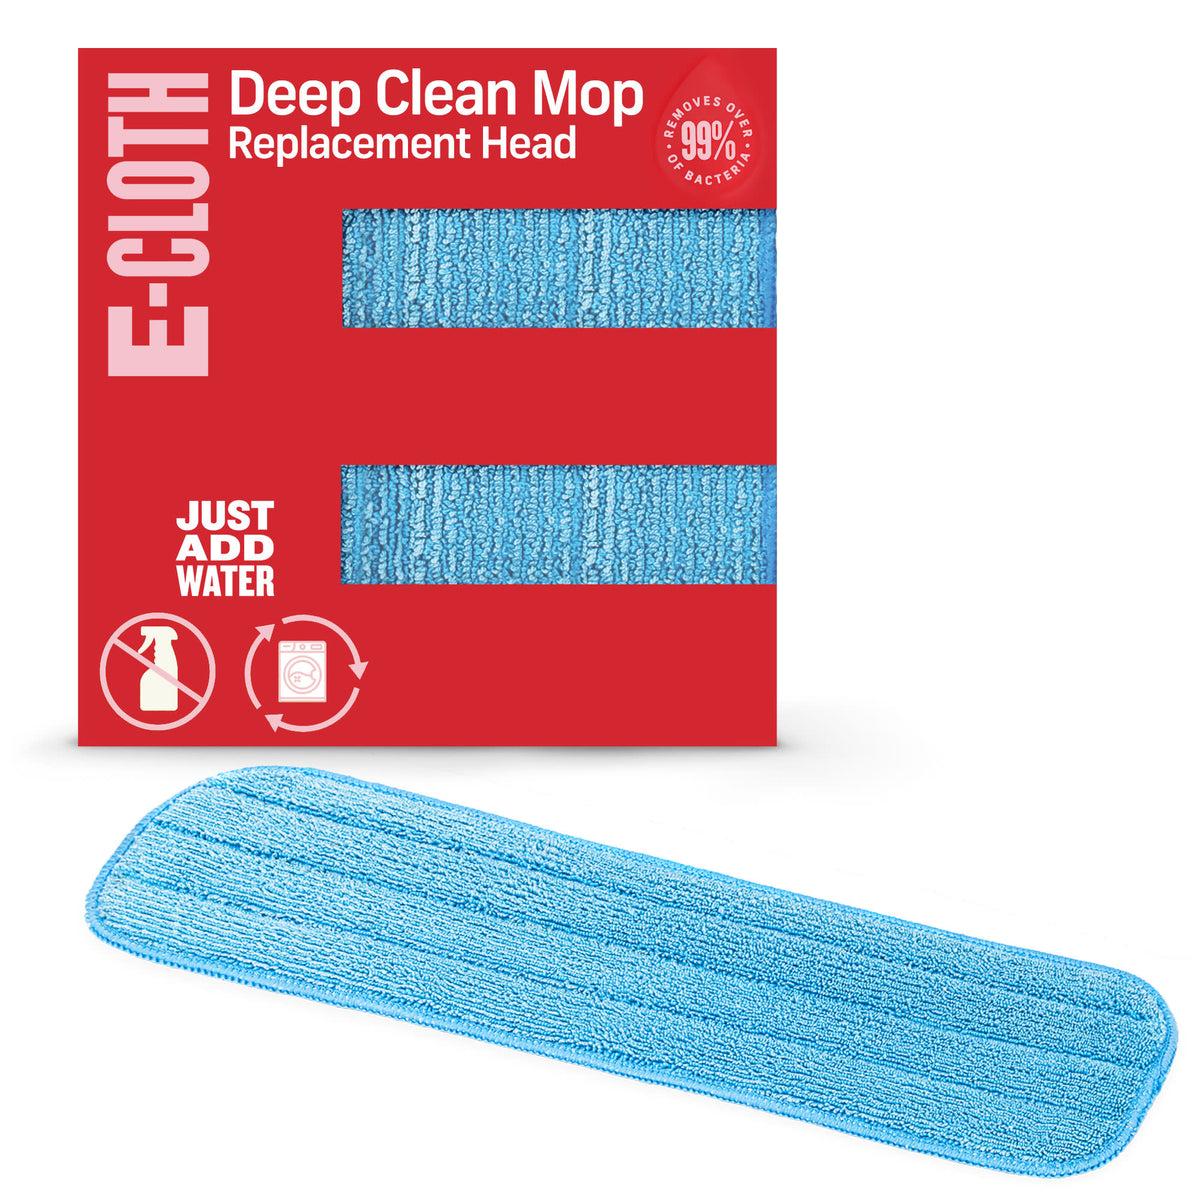 Replacement Standard-Sized Mop Head